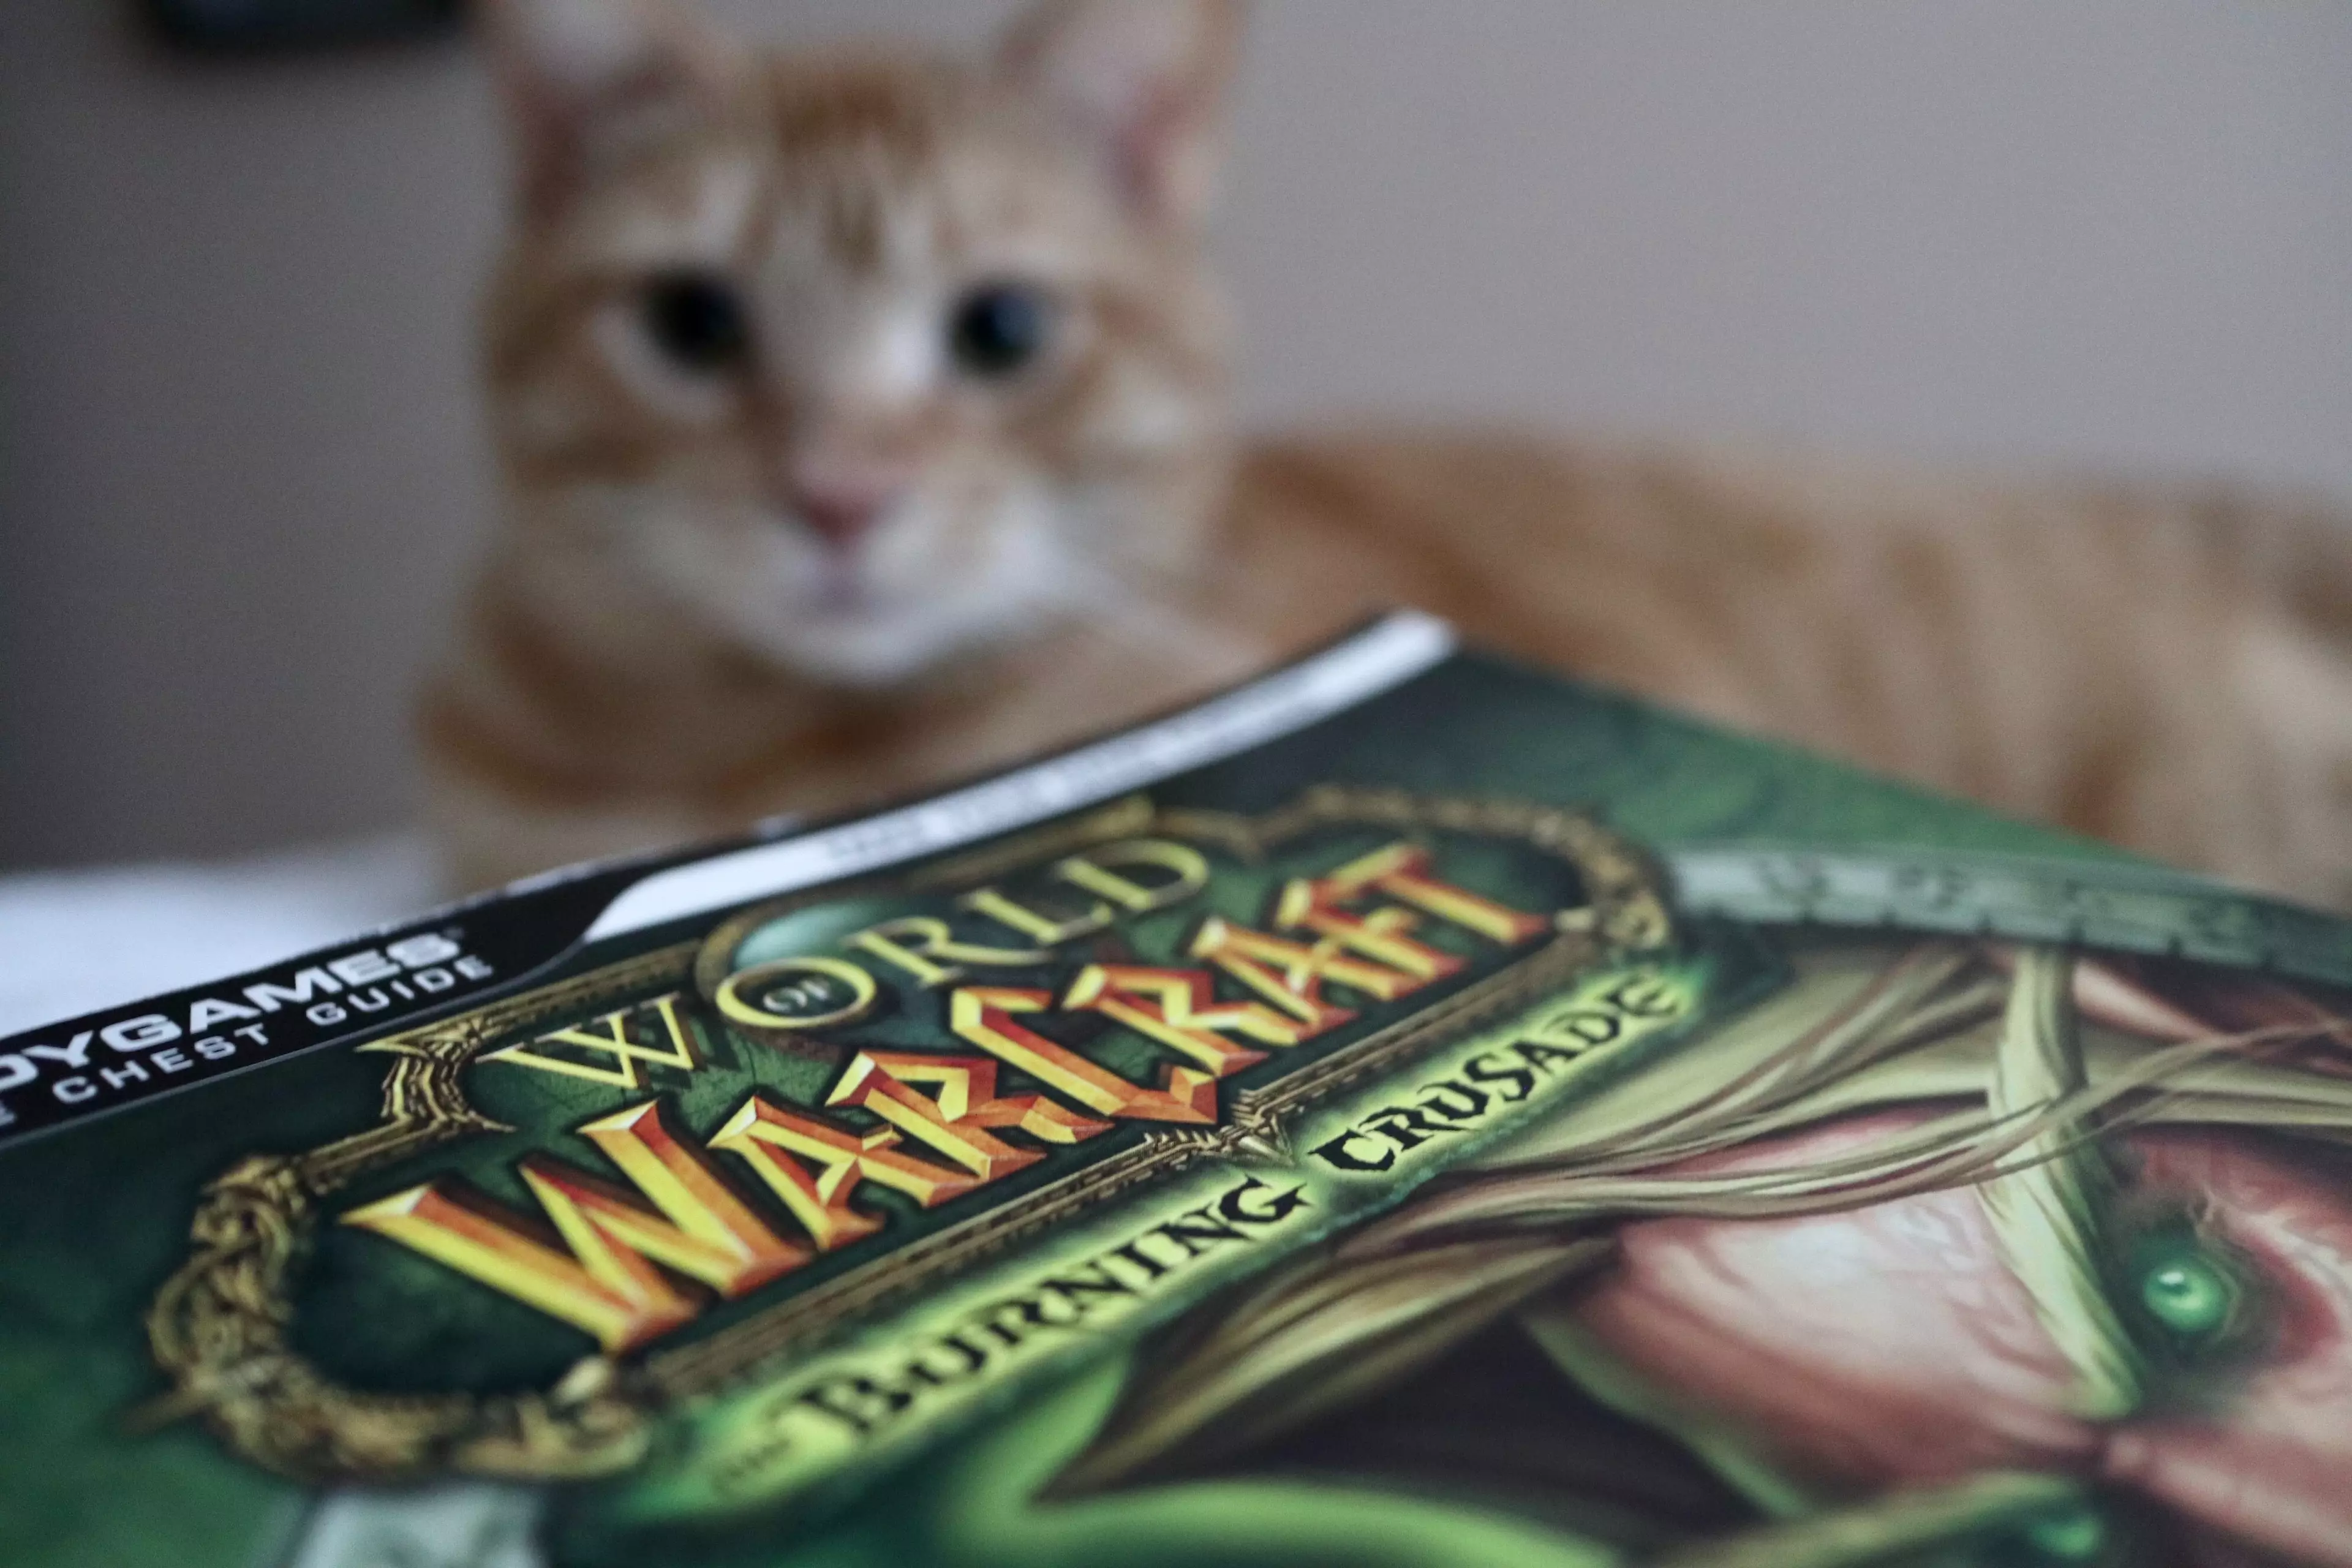 A cat with a 'World of Warcraft' guide book /